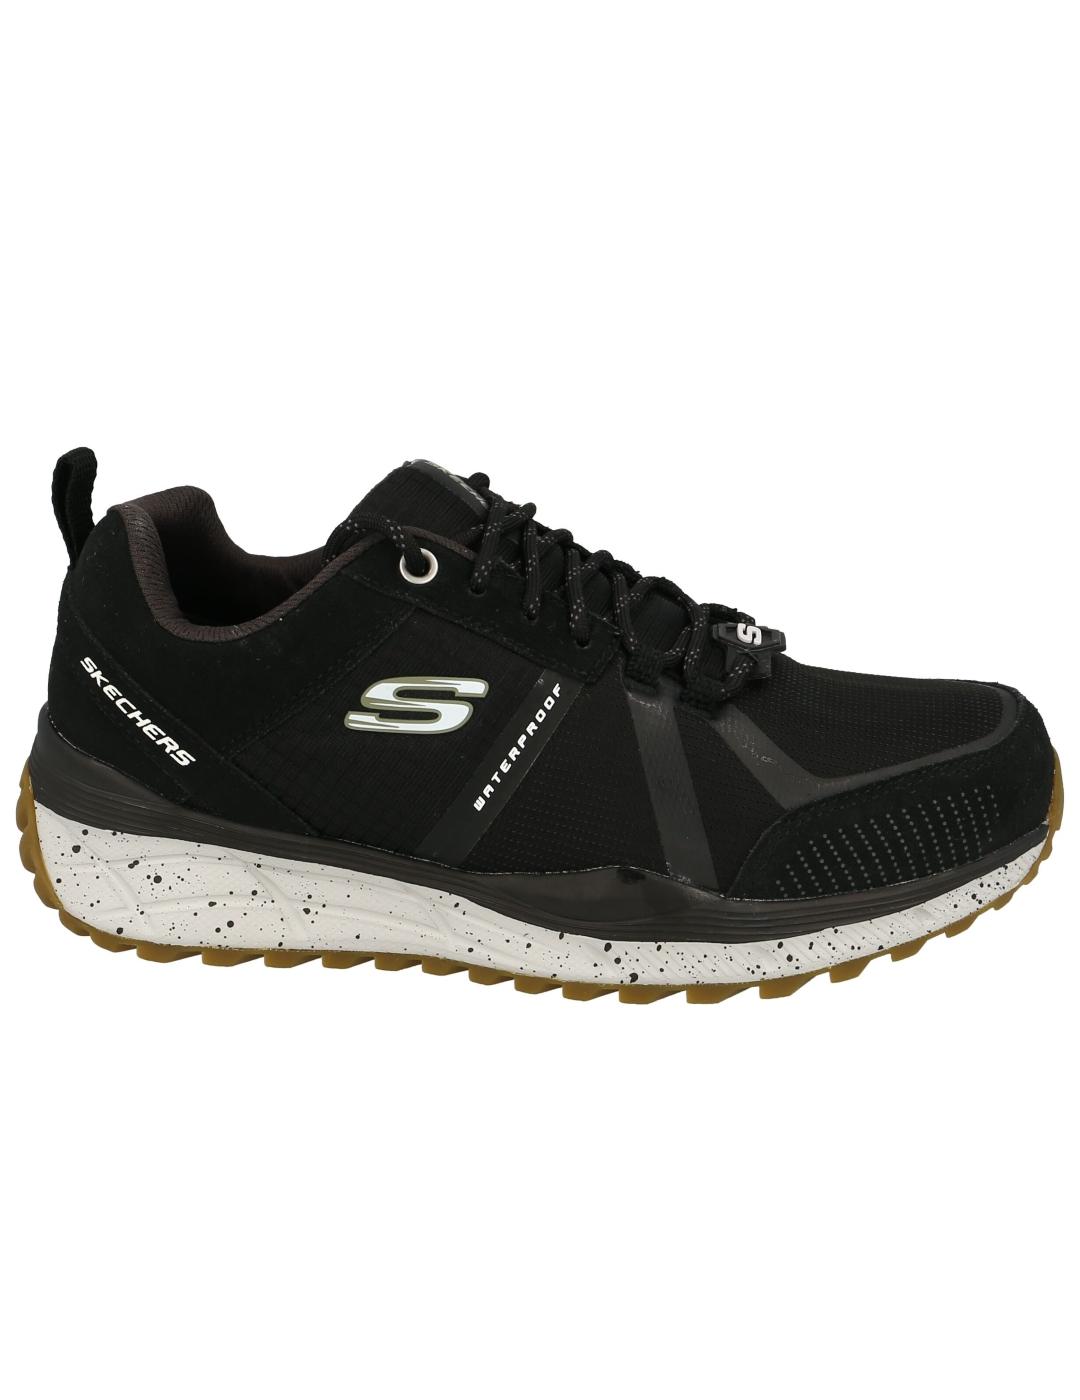 Zapatilla skechers equalizer 4.0 trail quintise ho